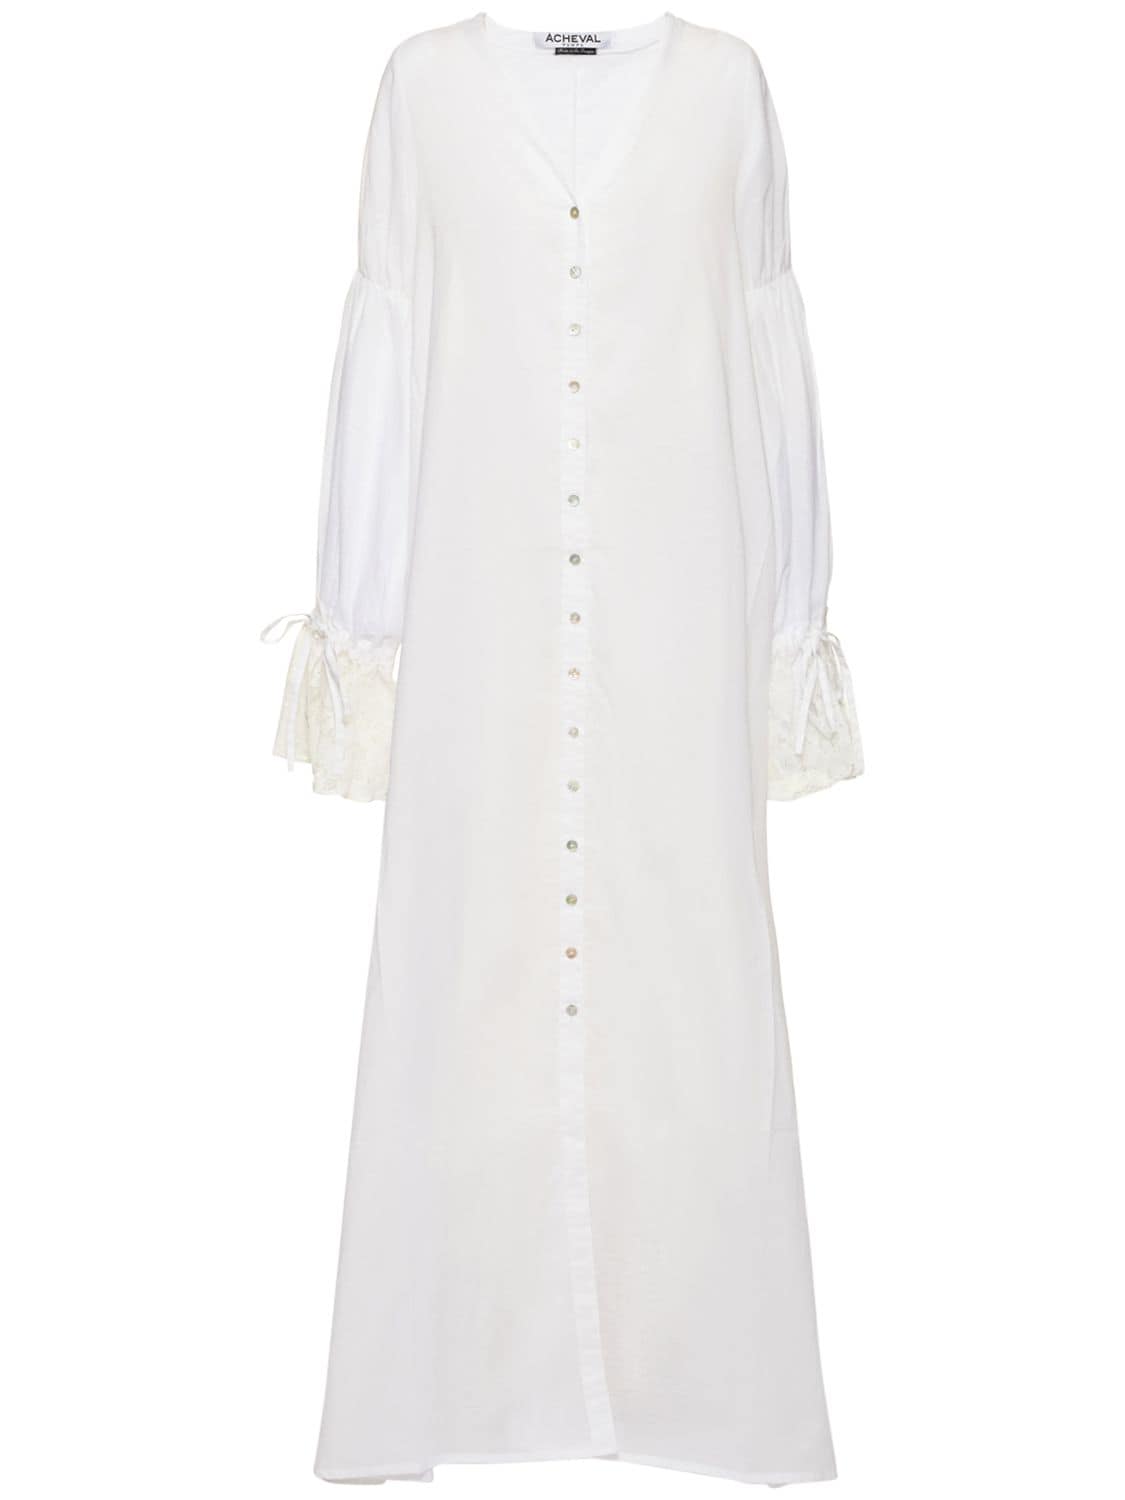 Acheval Pampa Patagonia Cotton Voile Dress In White